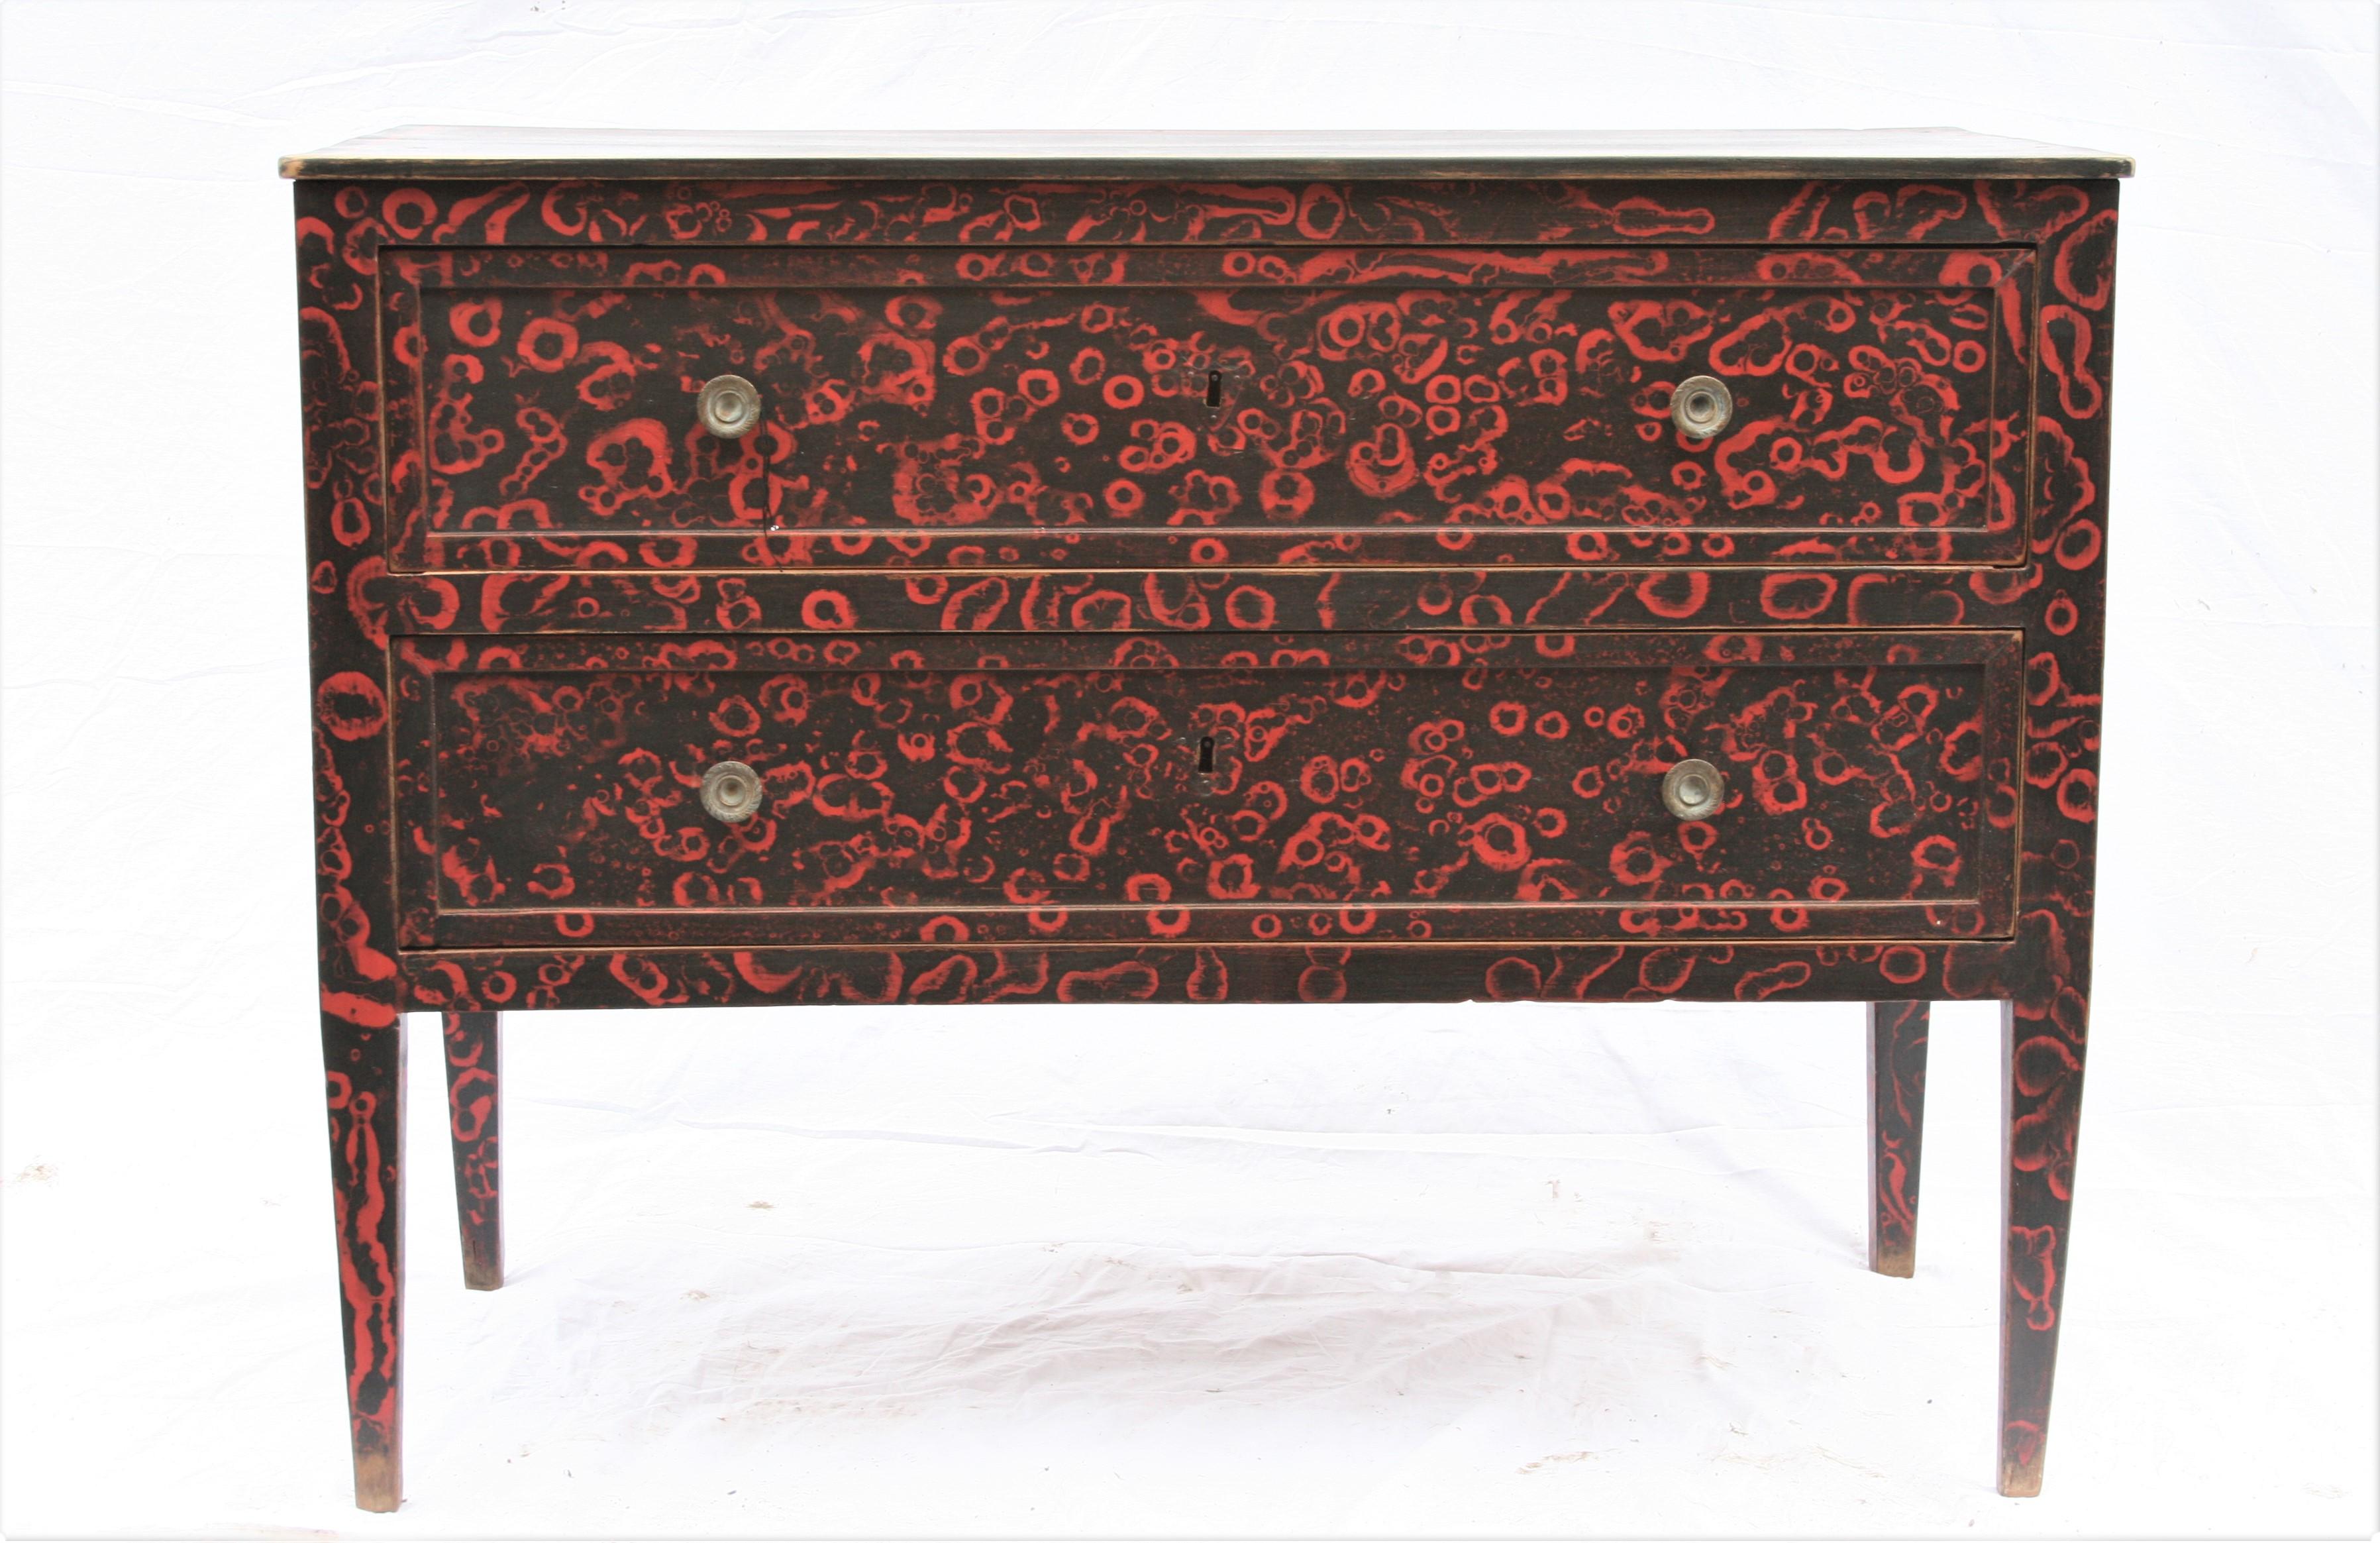 Good elegant model of period commode in red and black paint finish, two drawers and brass handles.